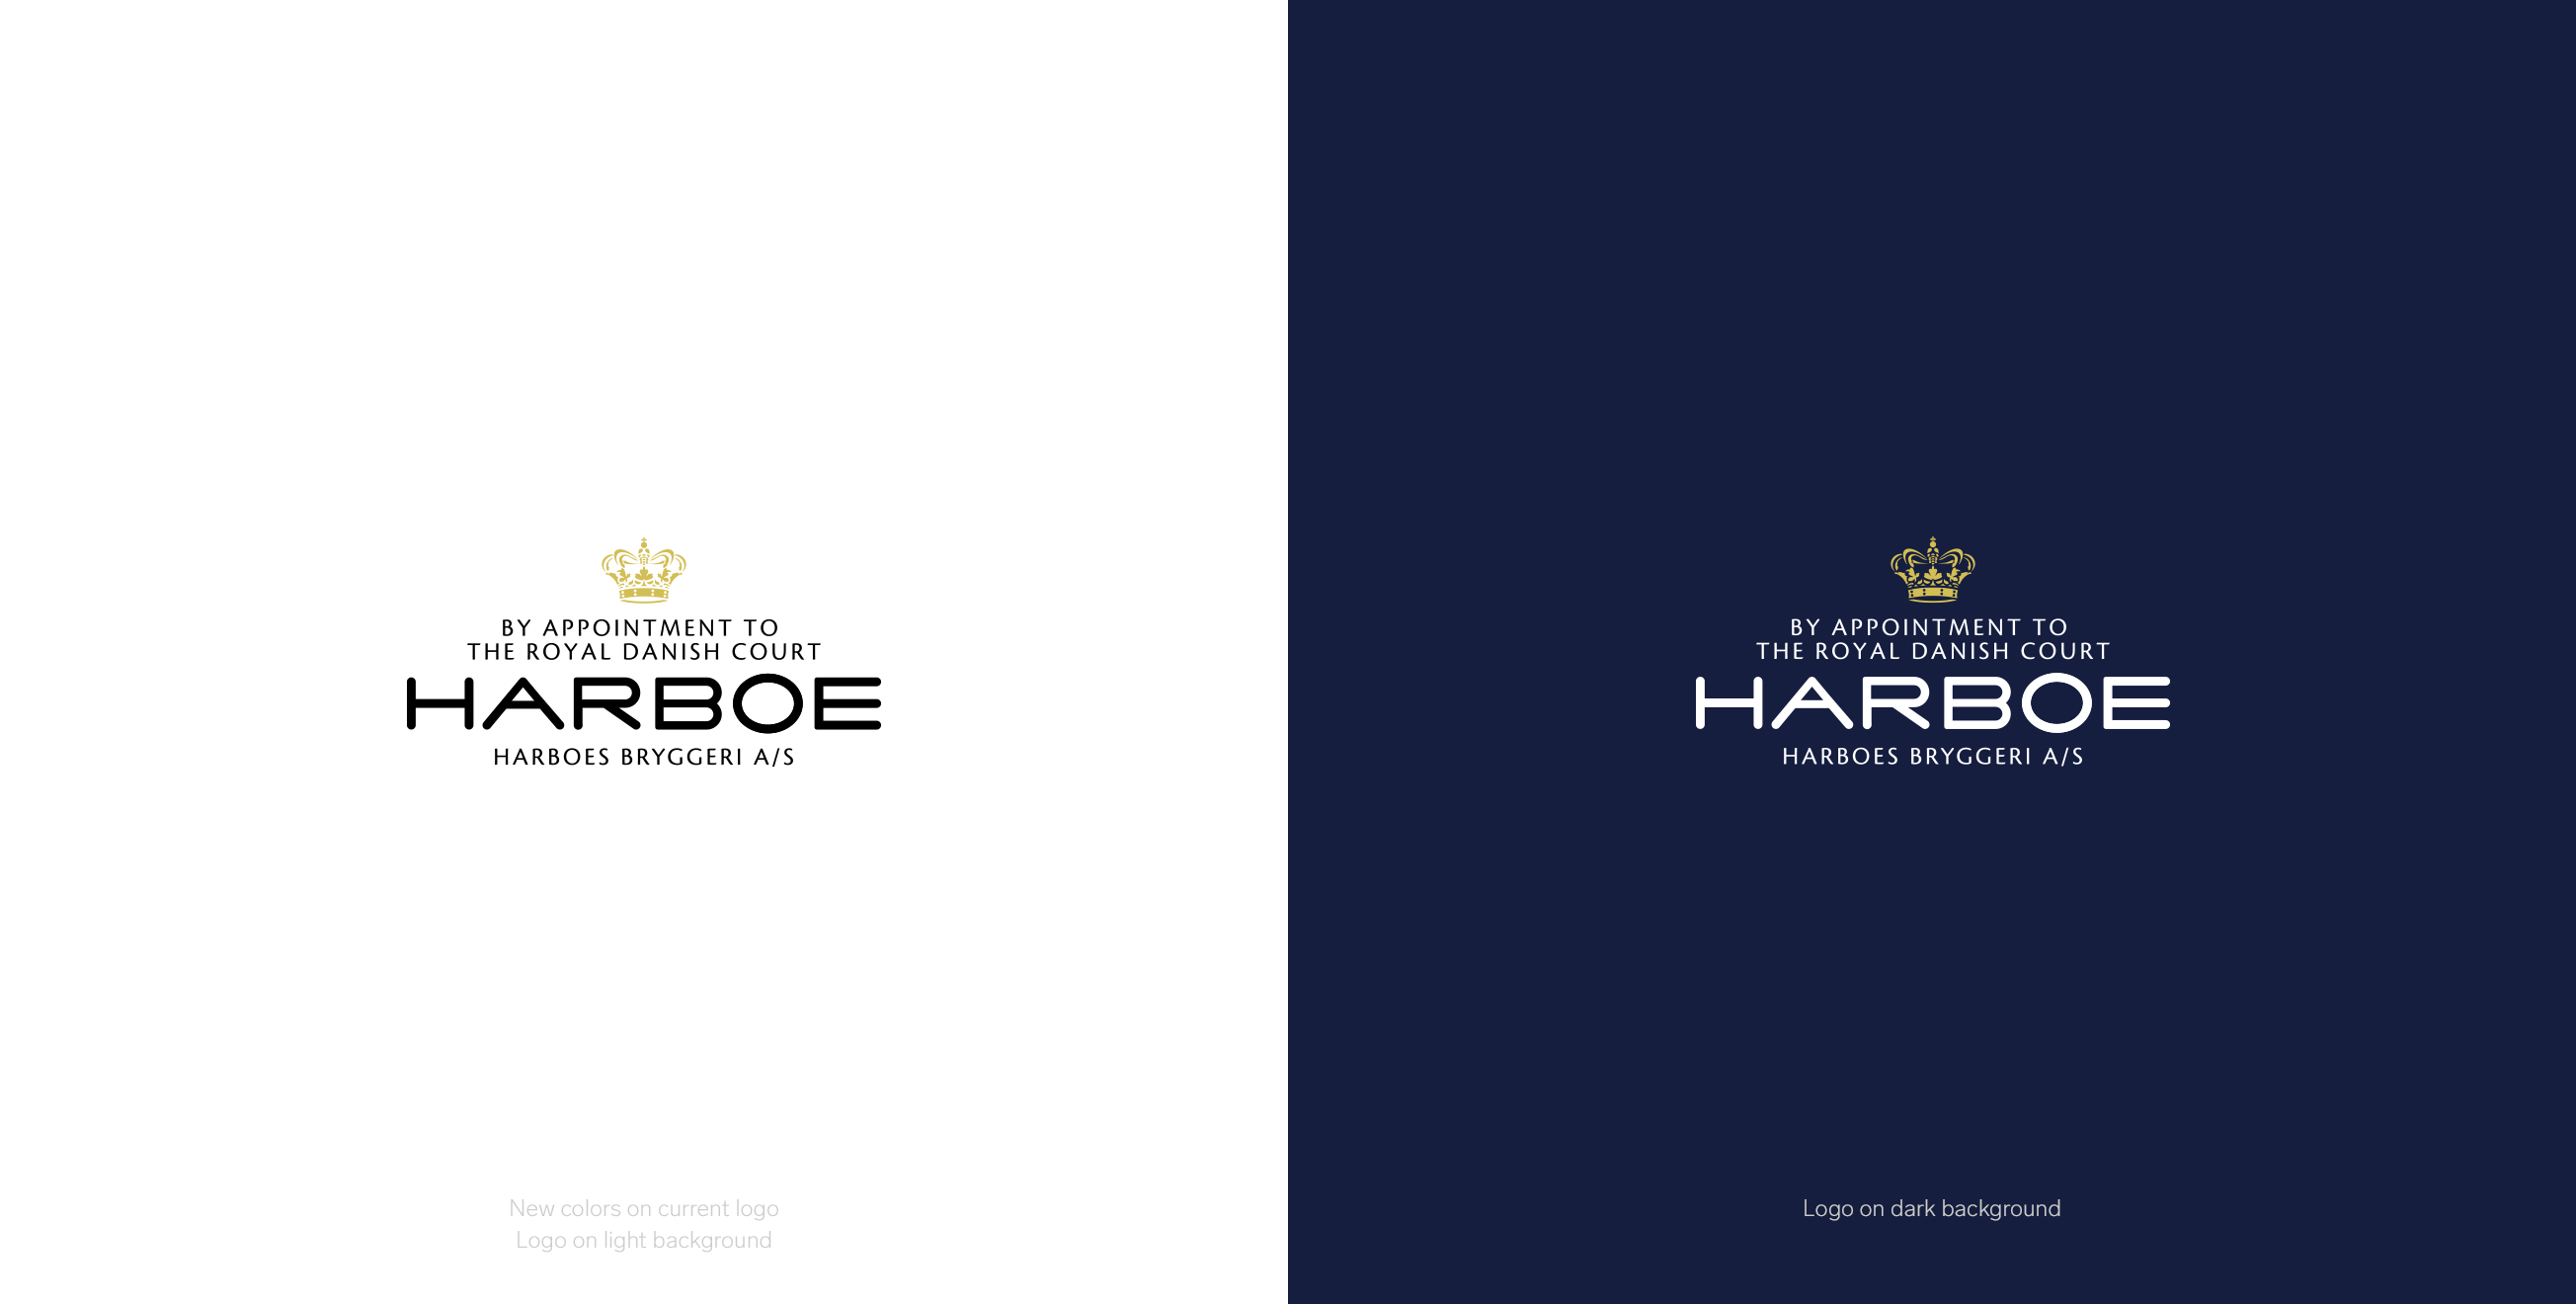 Harboe Breweries — Visual identity, art direction and UX/UI design.